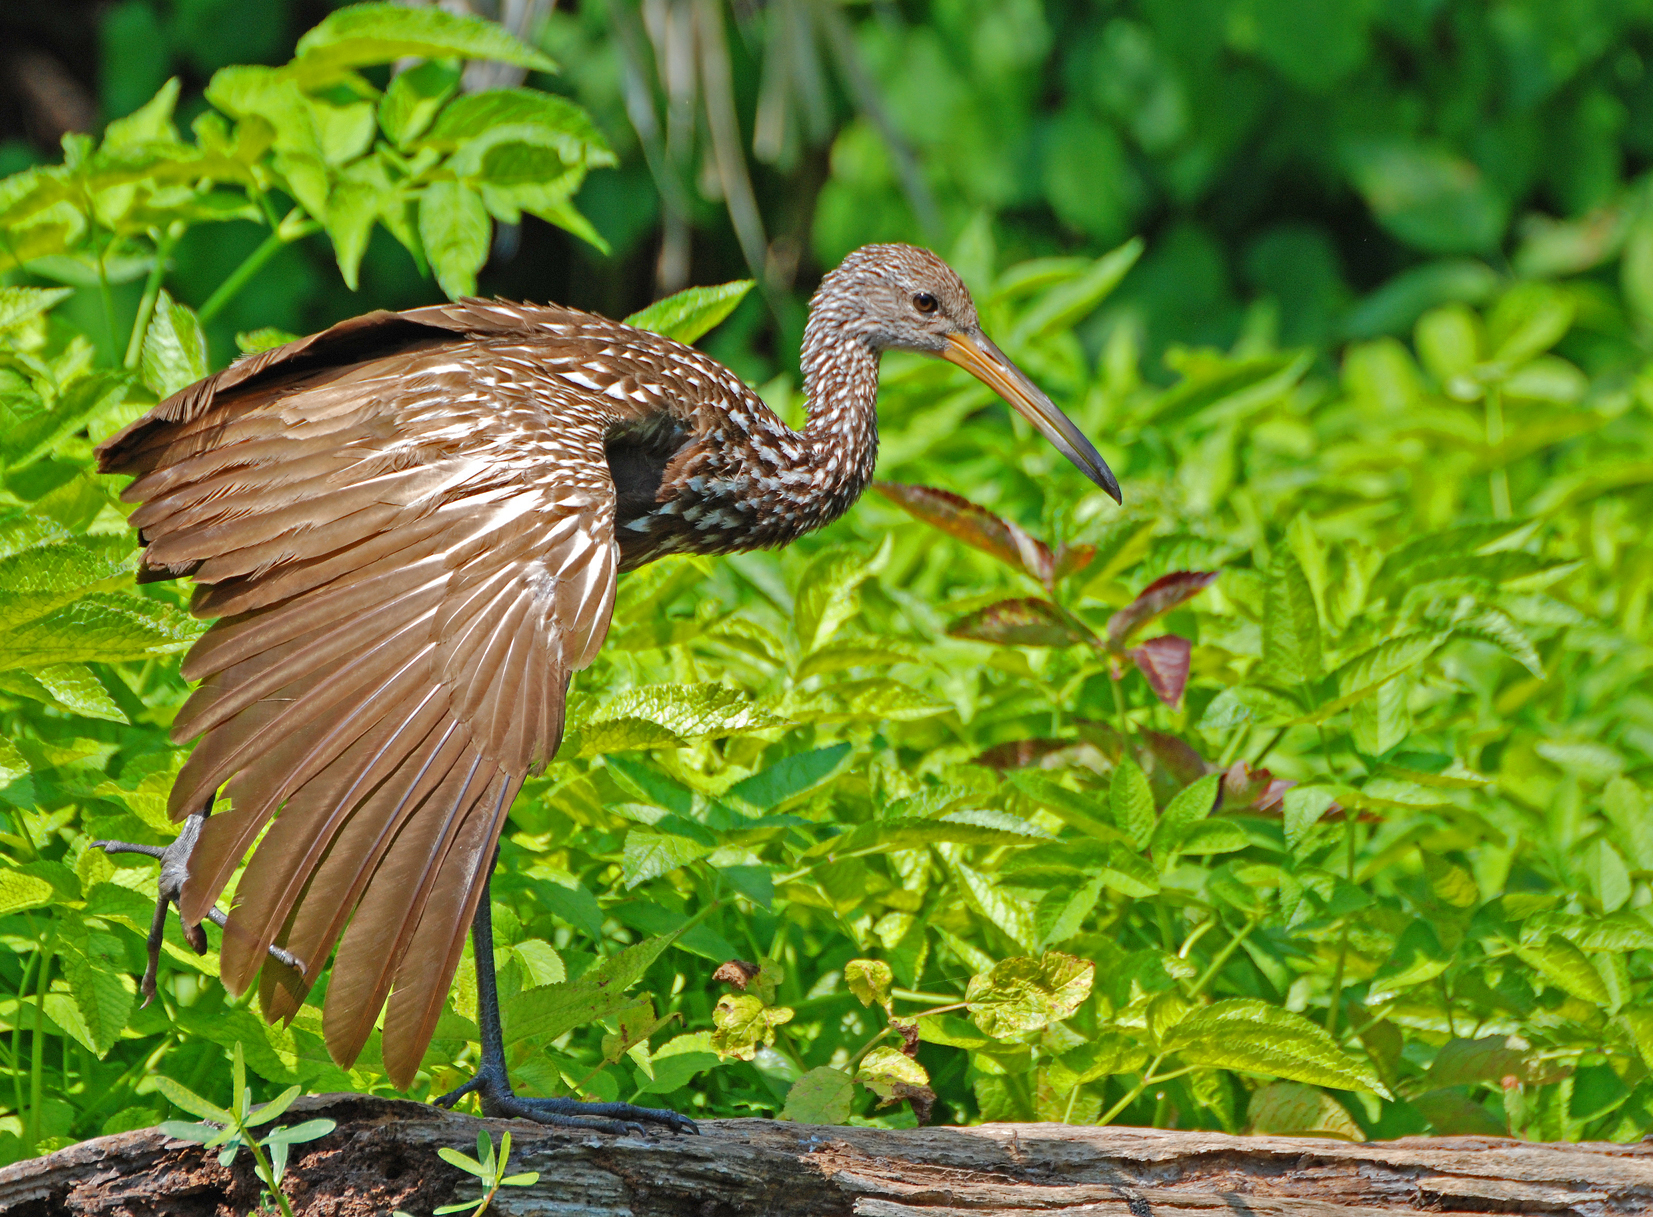 Limpkins only found in Florida in the U.S. Photo courtesy of Wikimedia Commons